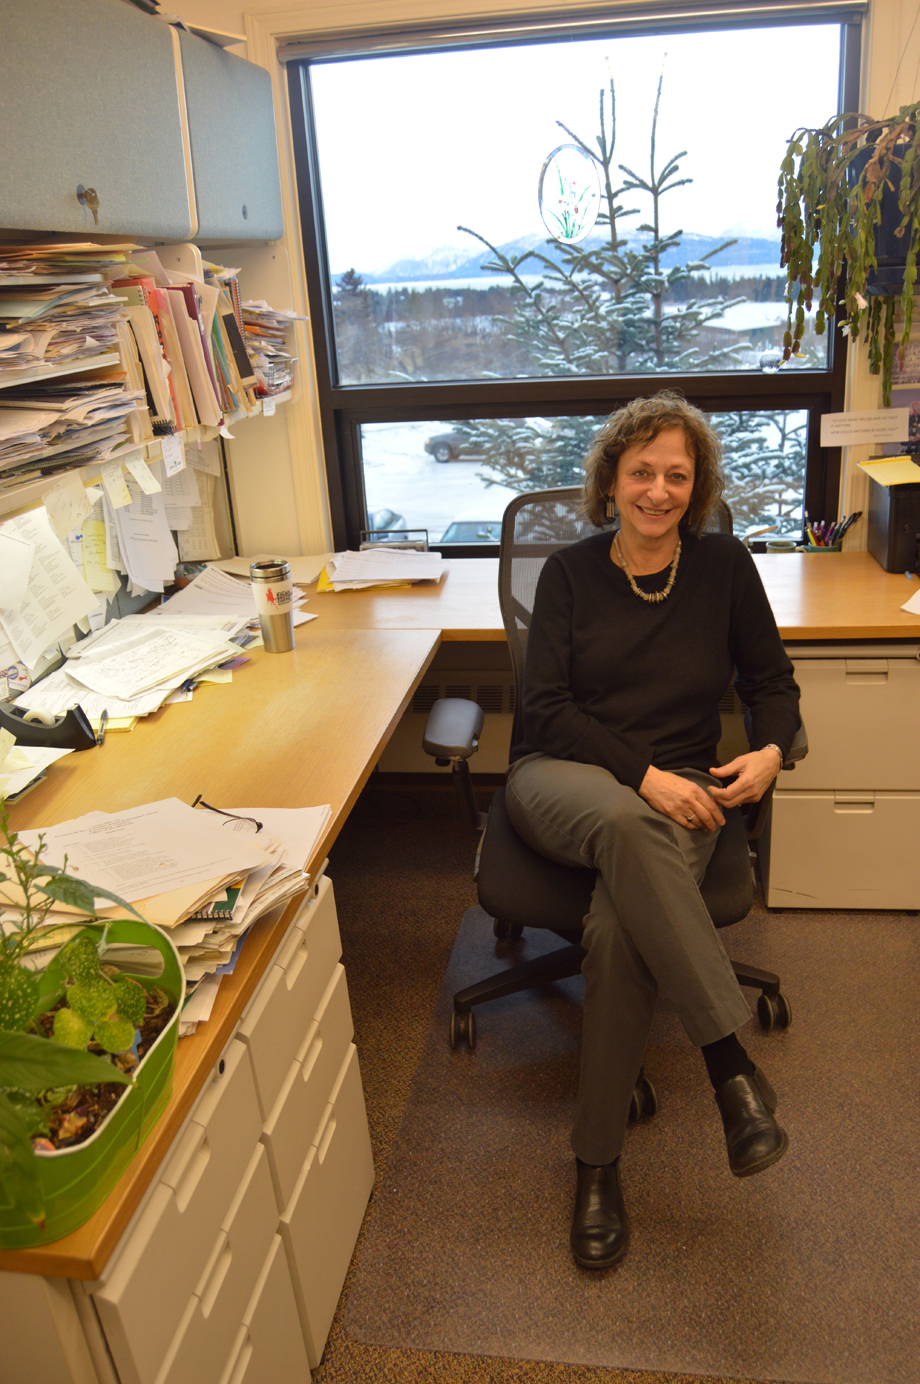 Kachemak Bay Campus Director Carol Swartz takes a break in a busy day to talk about her work. Swartz recently was honored by the Alaska Adult Education Association for her outstanding long-term contribution to lifelong learning.-Photo by Annie Rosenthal, Homer News